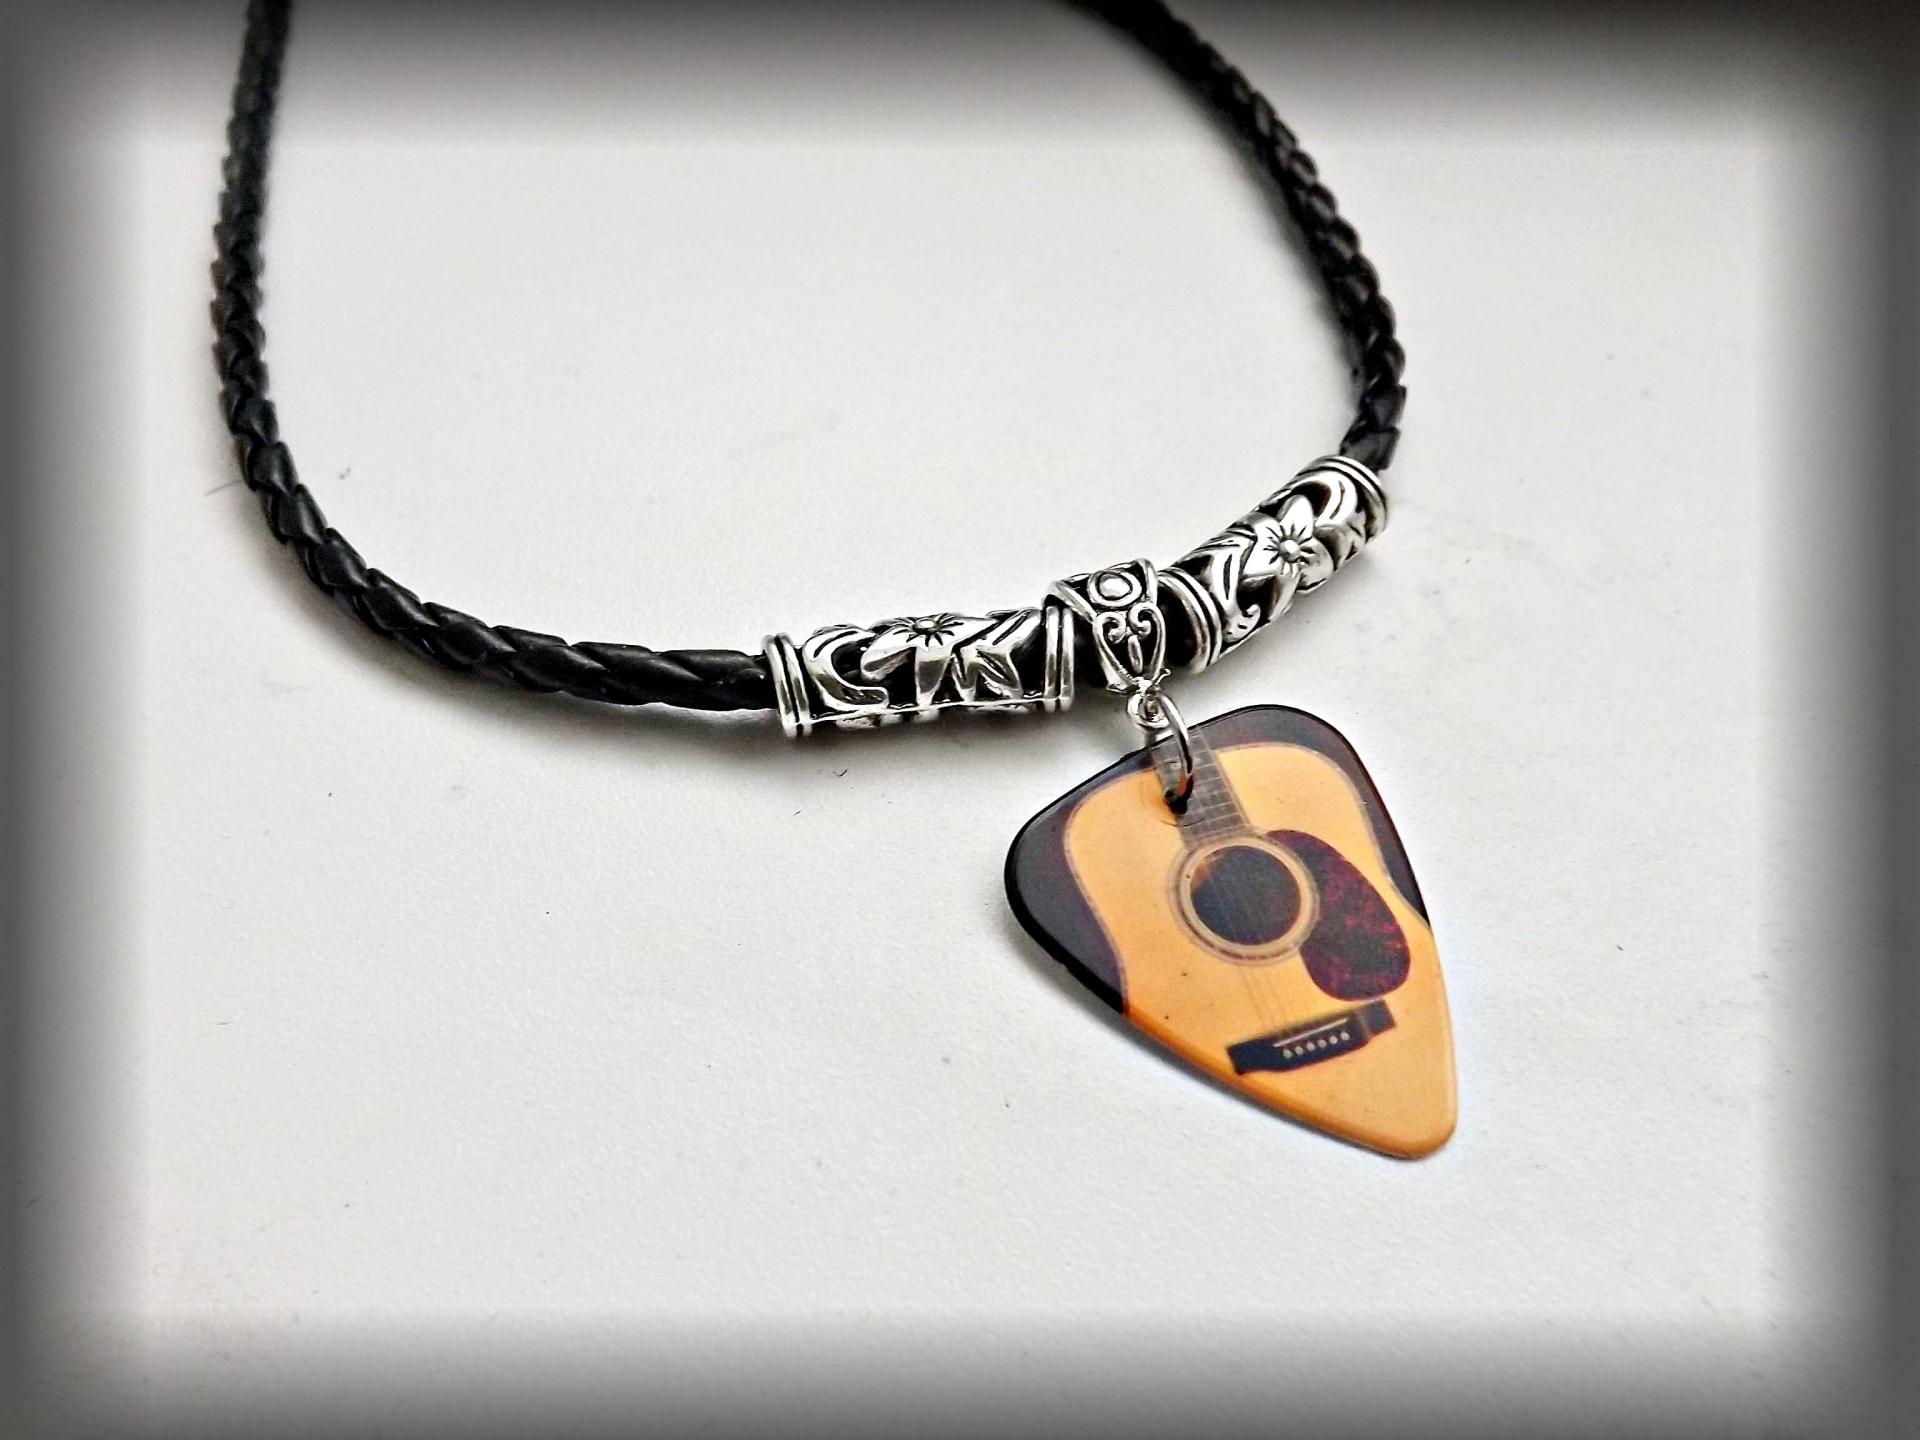 "Guitar Body" Image Choker Necklaces - Customisable!